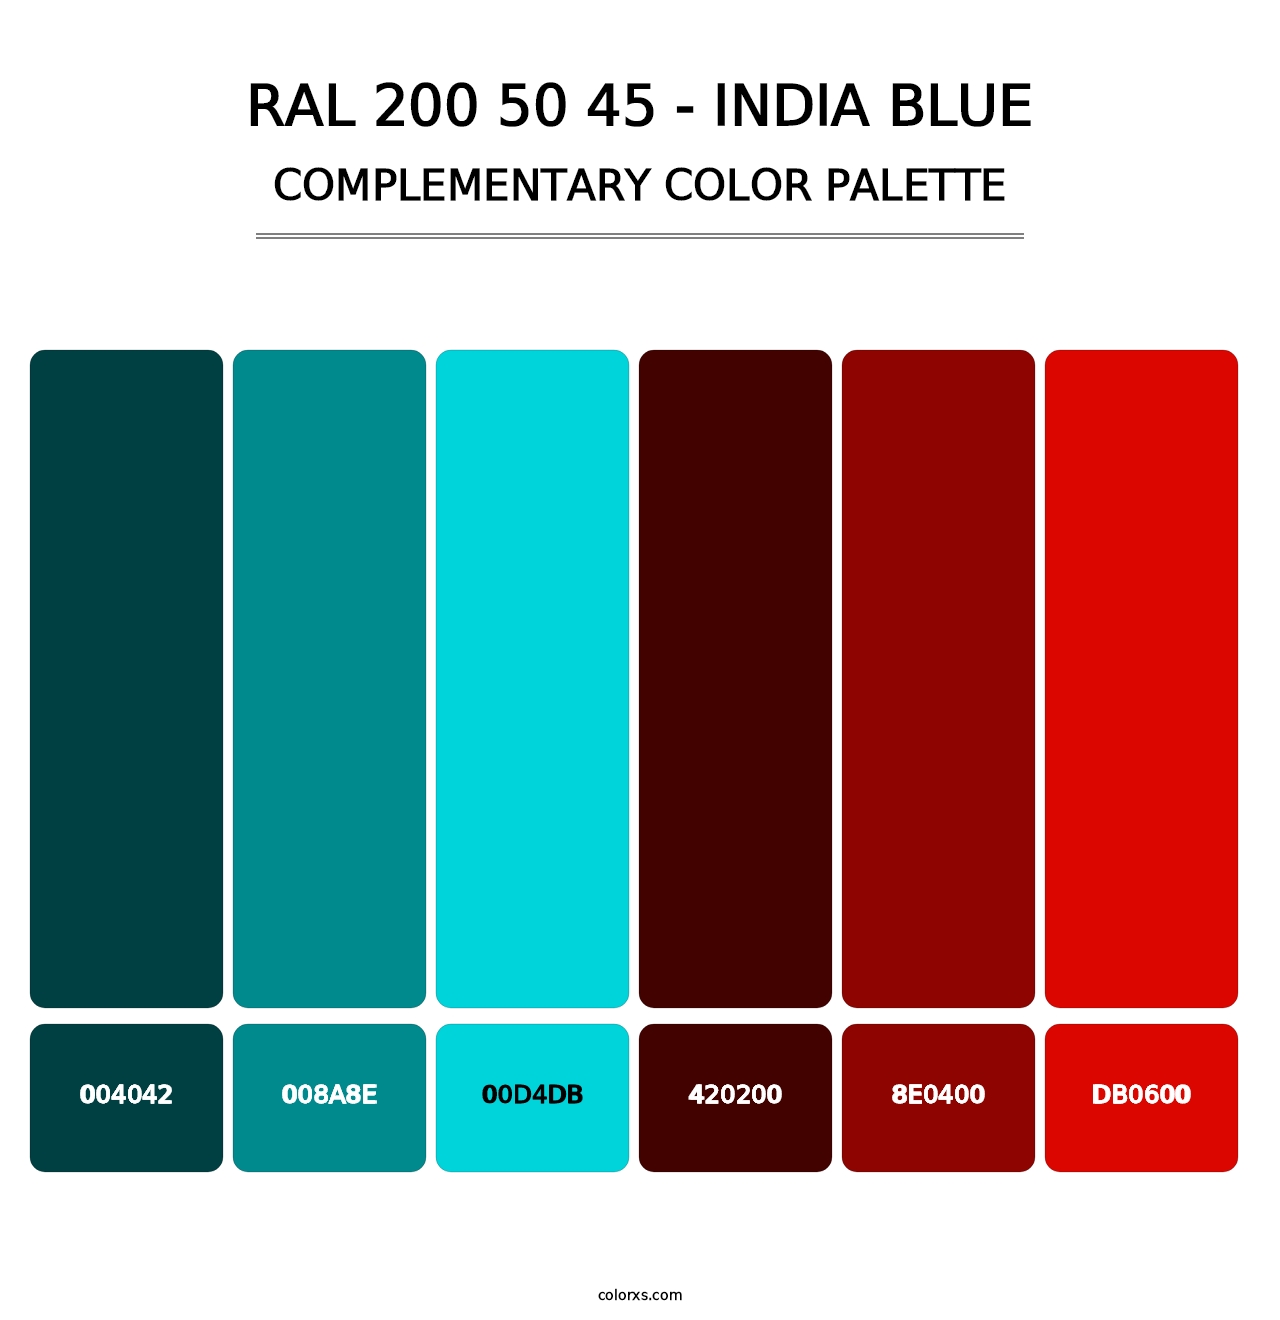 RAL 200 50 45 - India Blue - Complementary Color Palette